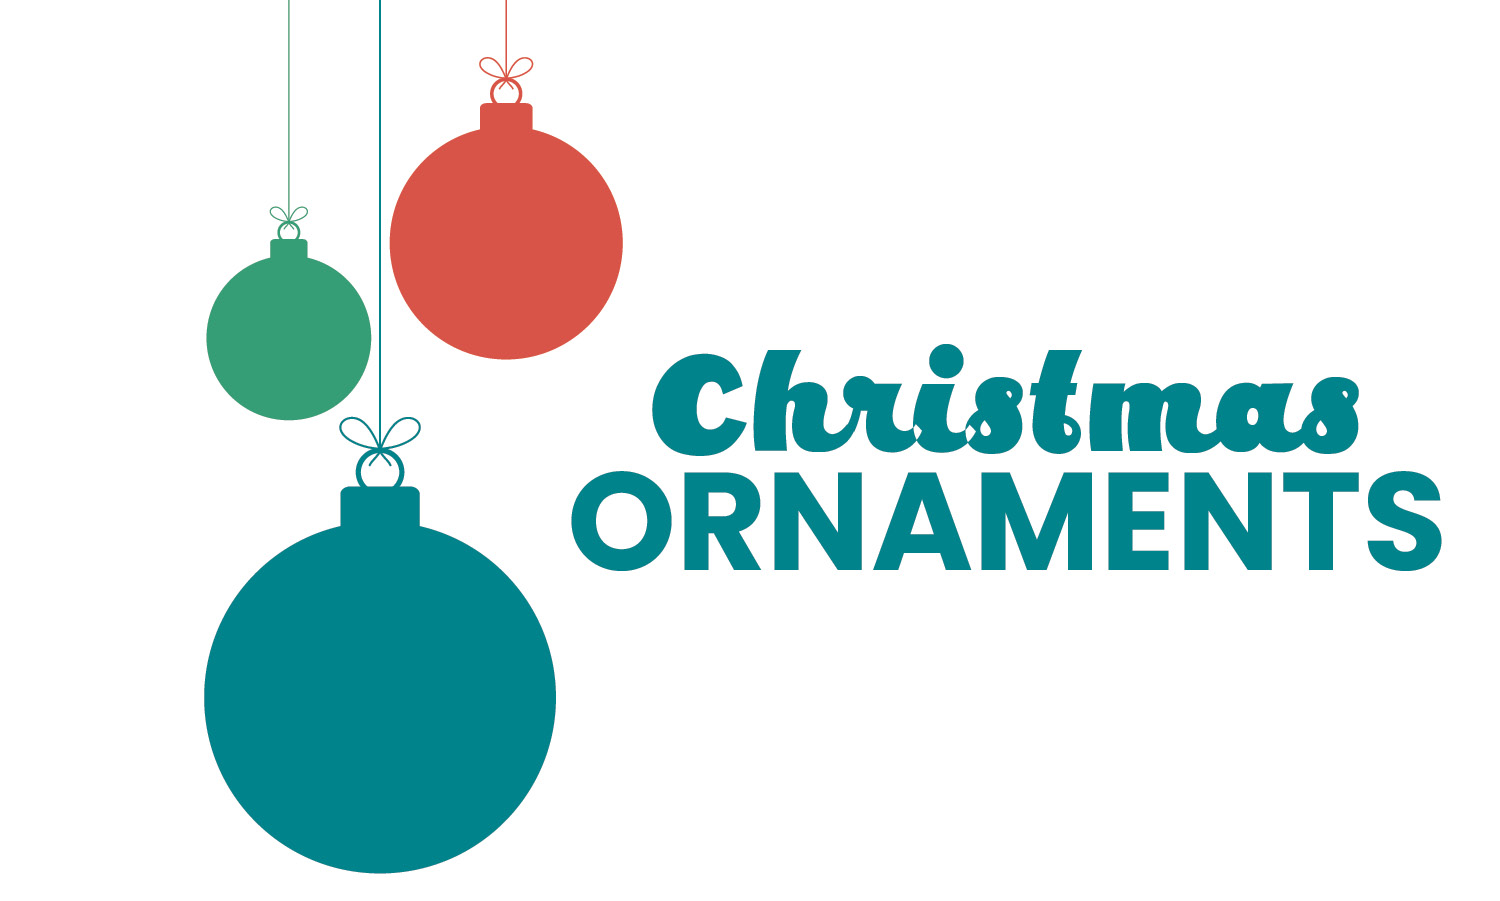 Illustration: 3 Christmas ornaments, hanging together on the left side of the image. Text on the right side of the image: Christmas Ornaments